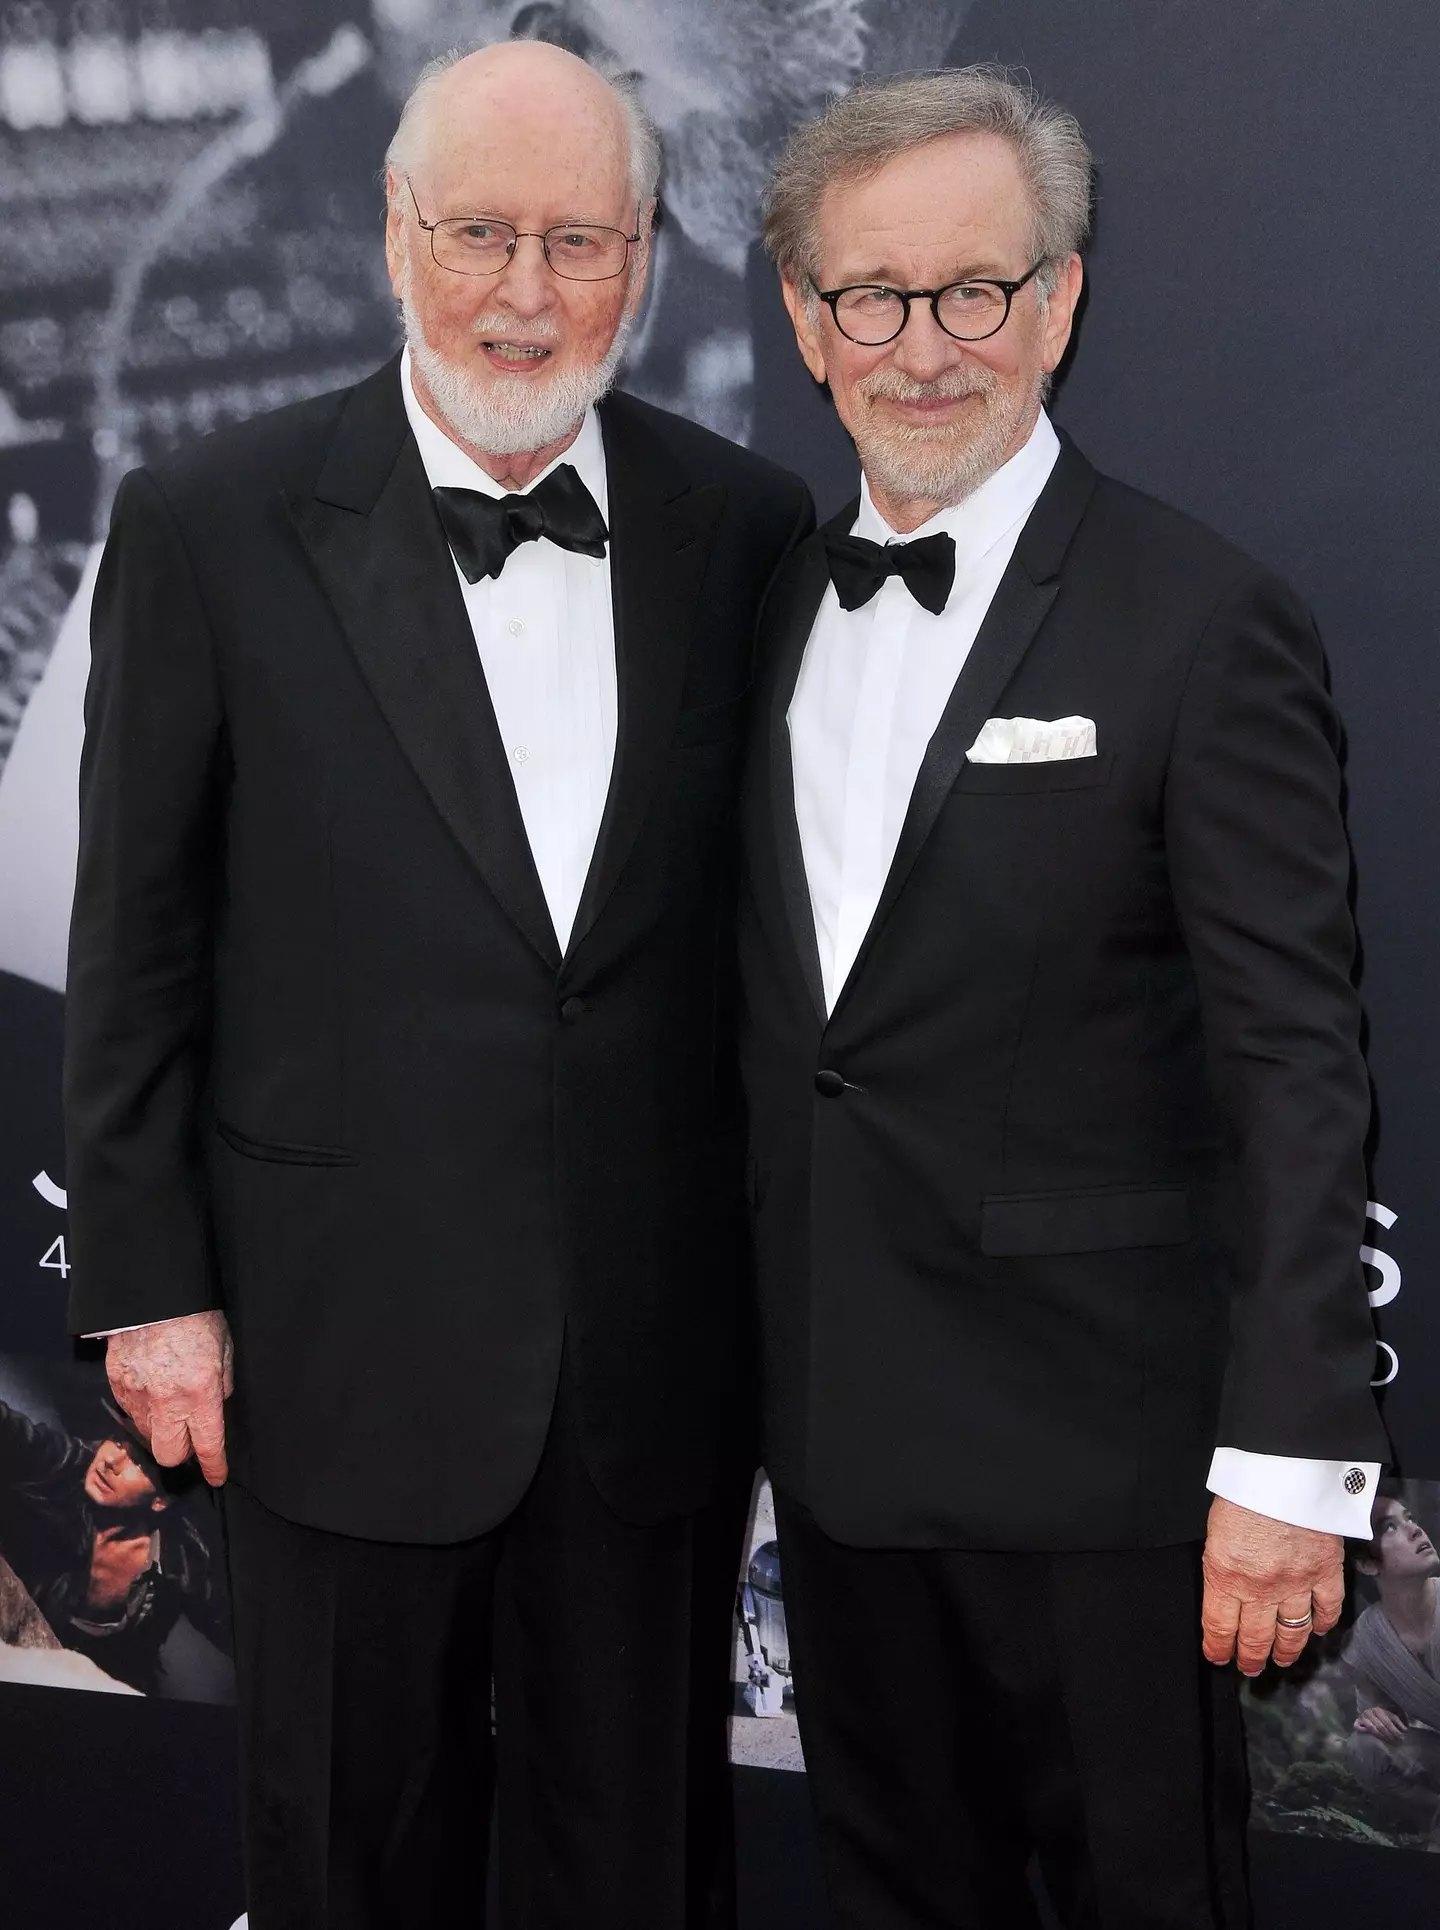 John Williams has produced iconic scores for Jaws, Jurassic Park and Indiana Jones.